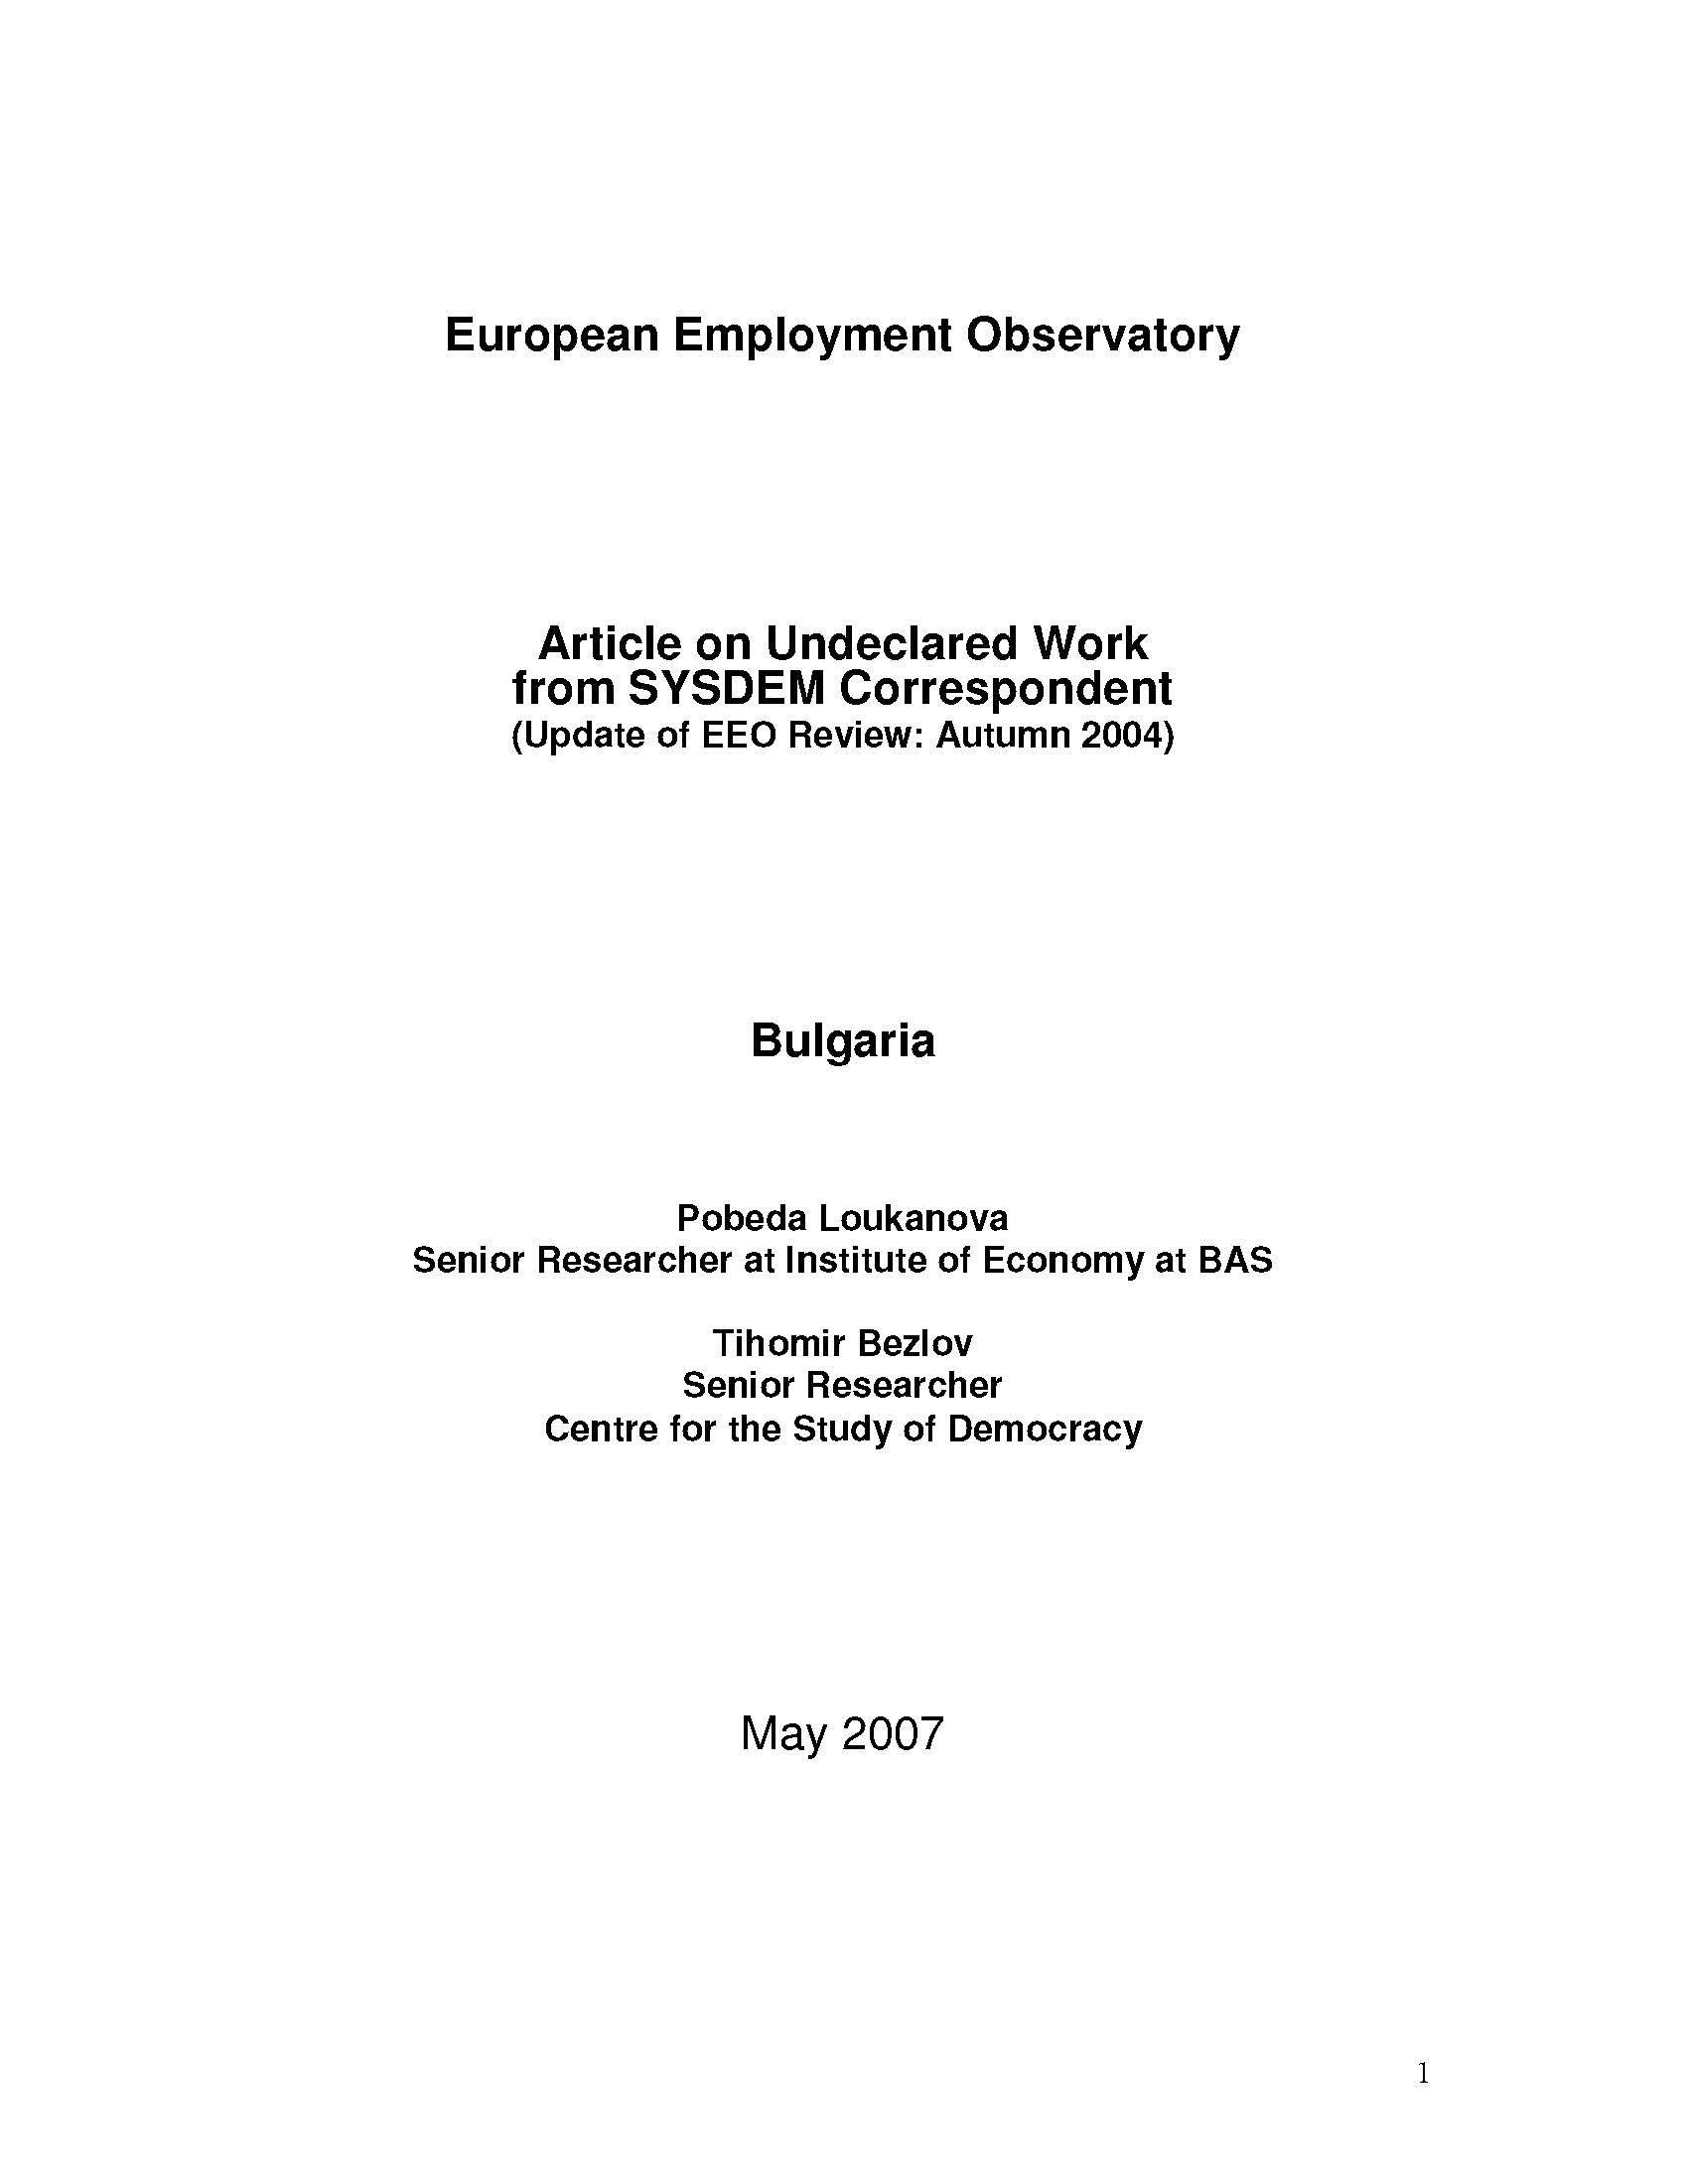 Article on Undeclared Work from SYSDEM Correspondent: Bulgaria Cover Image